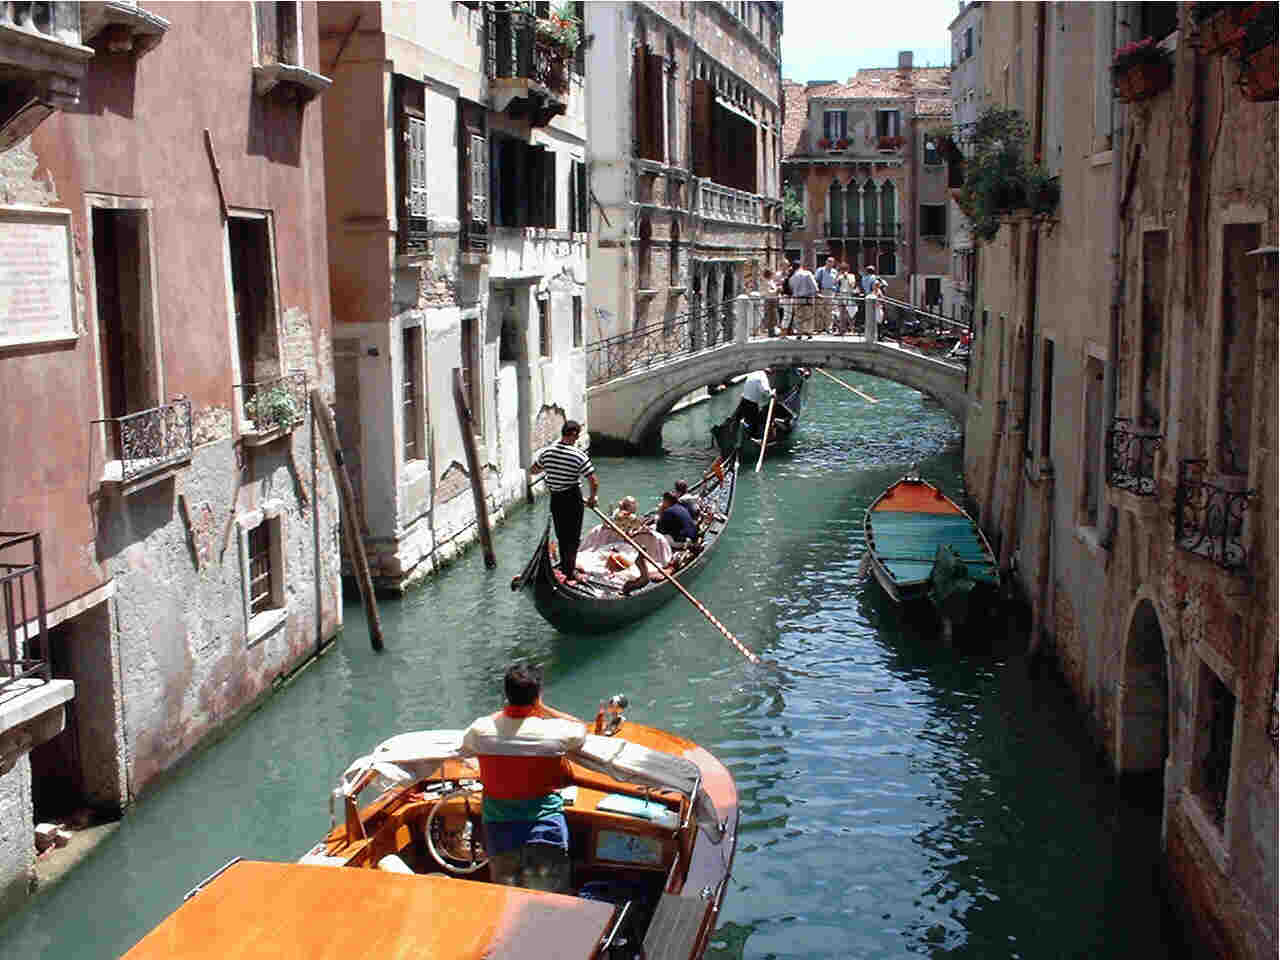 Typical canal scene